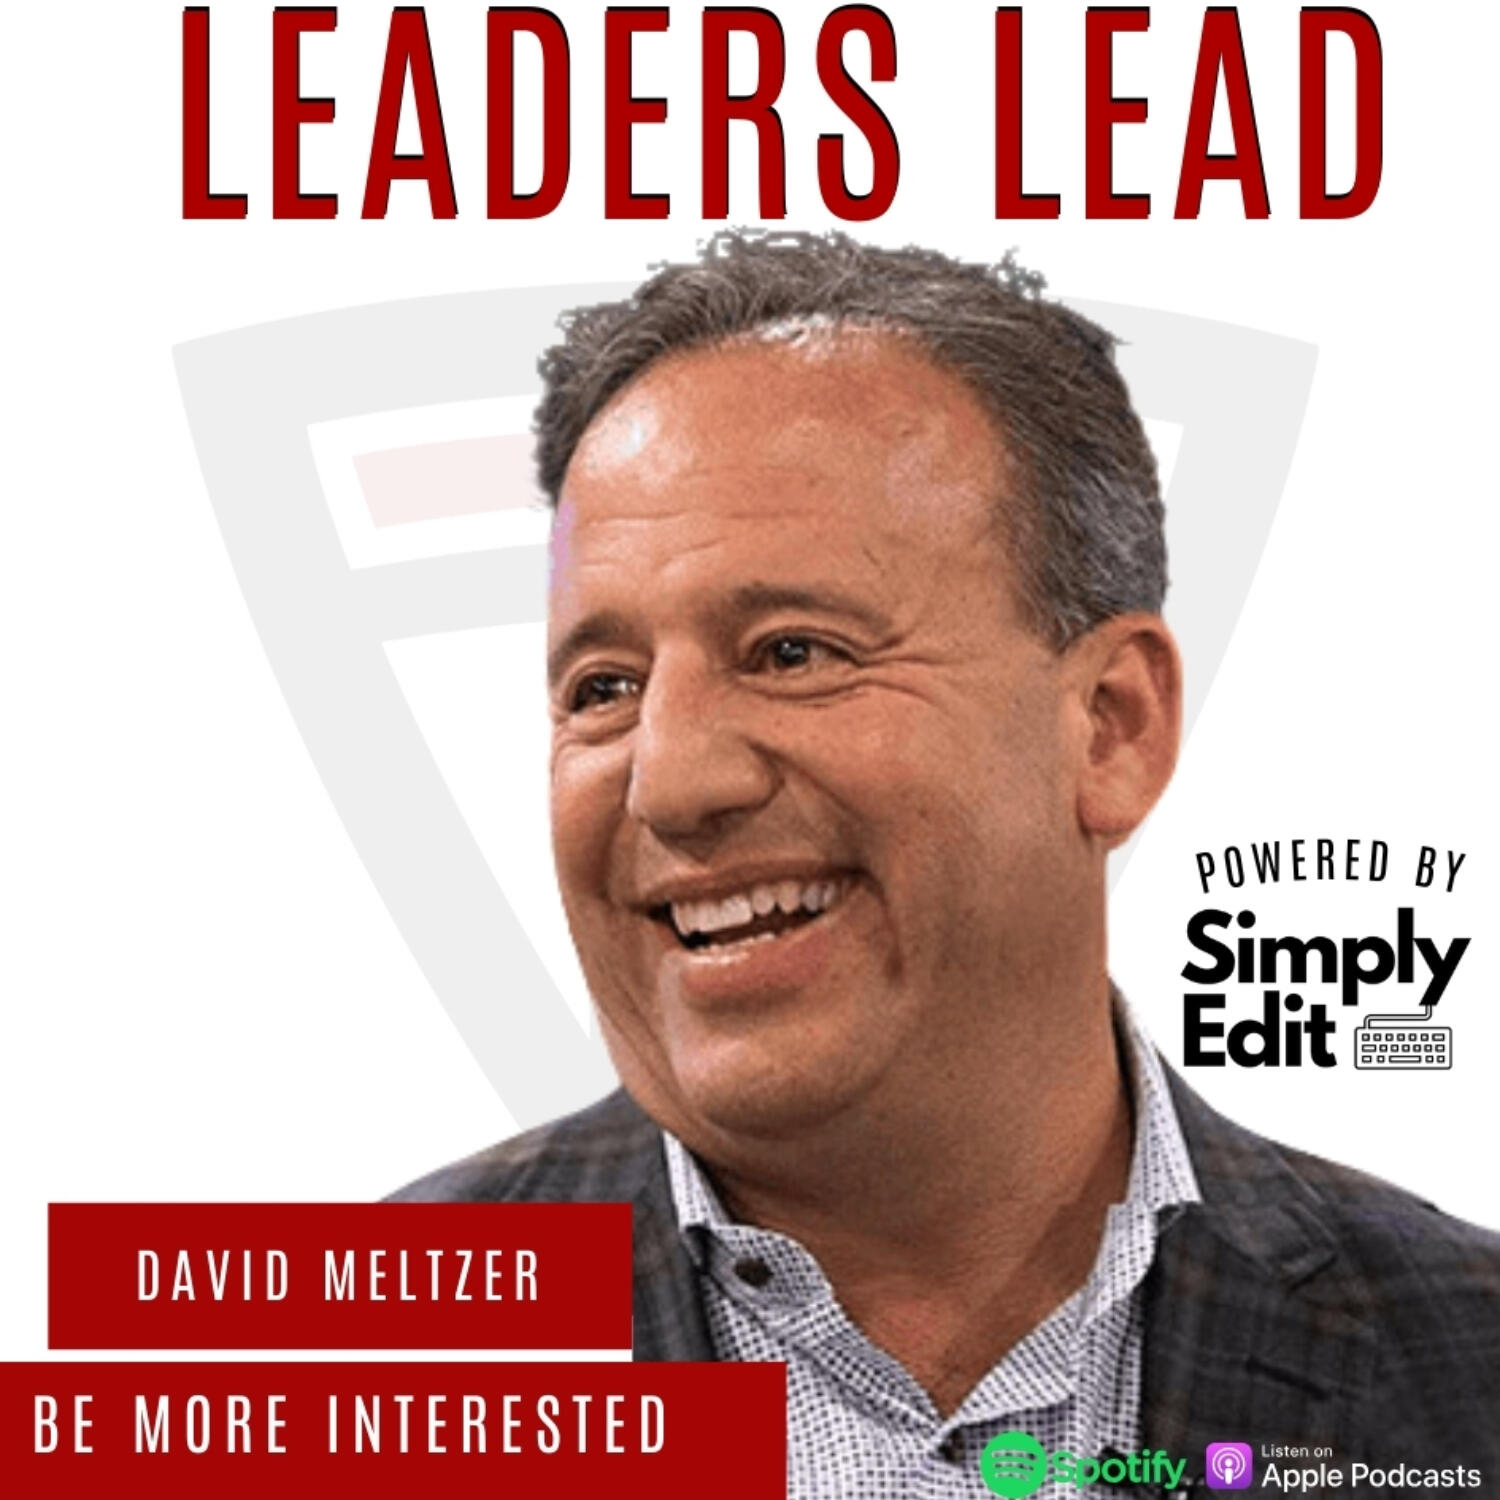 Be More Interested with David Meltzer